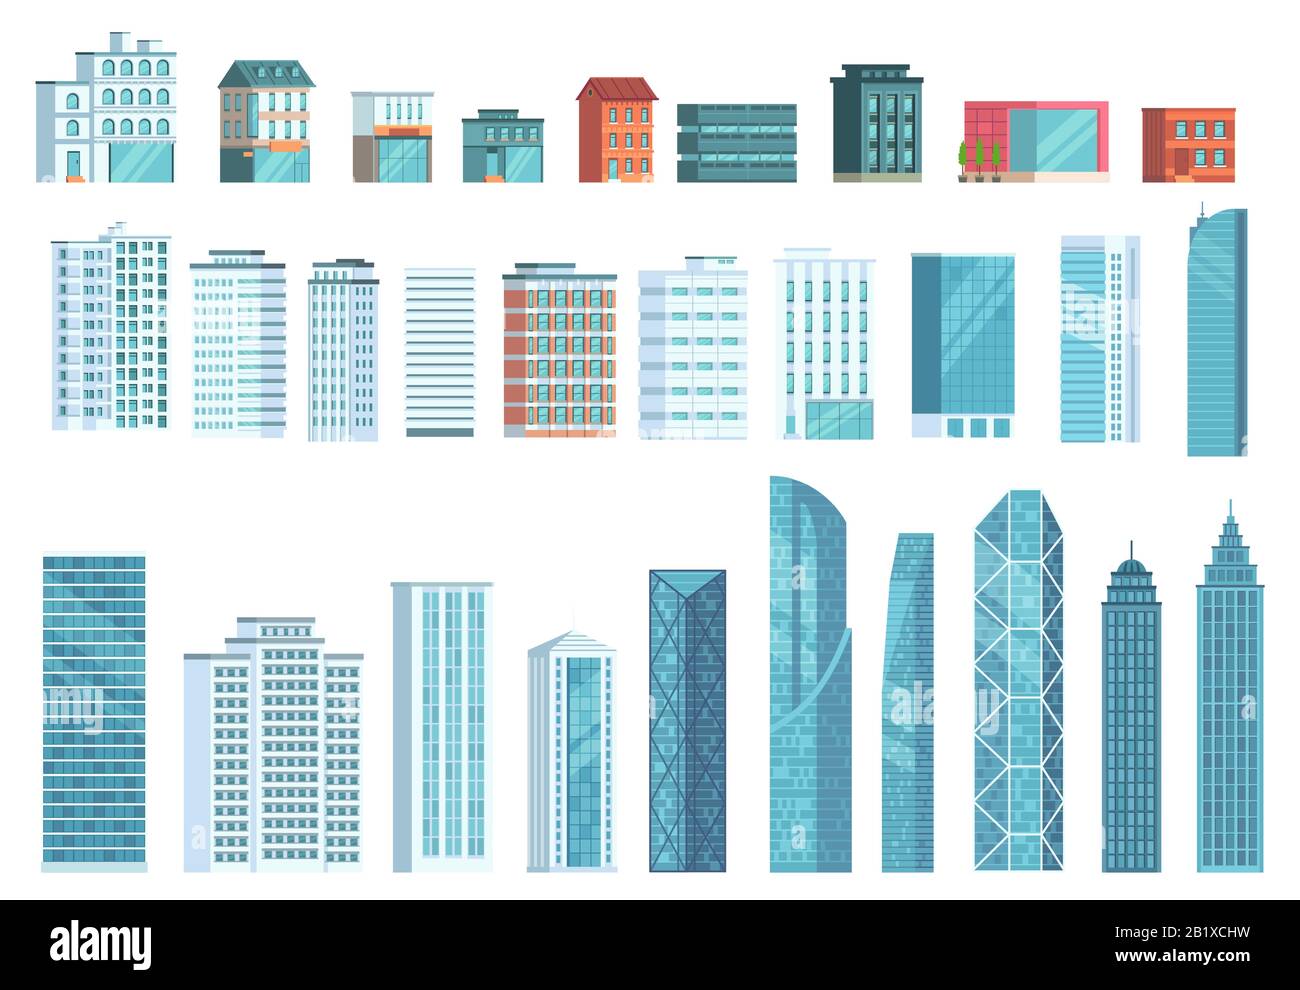 Modern city buildings. City skyscraper building, town houses, business office skyscrapers vector illustration set Stock Vector